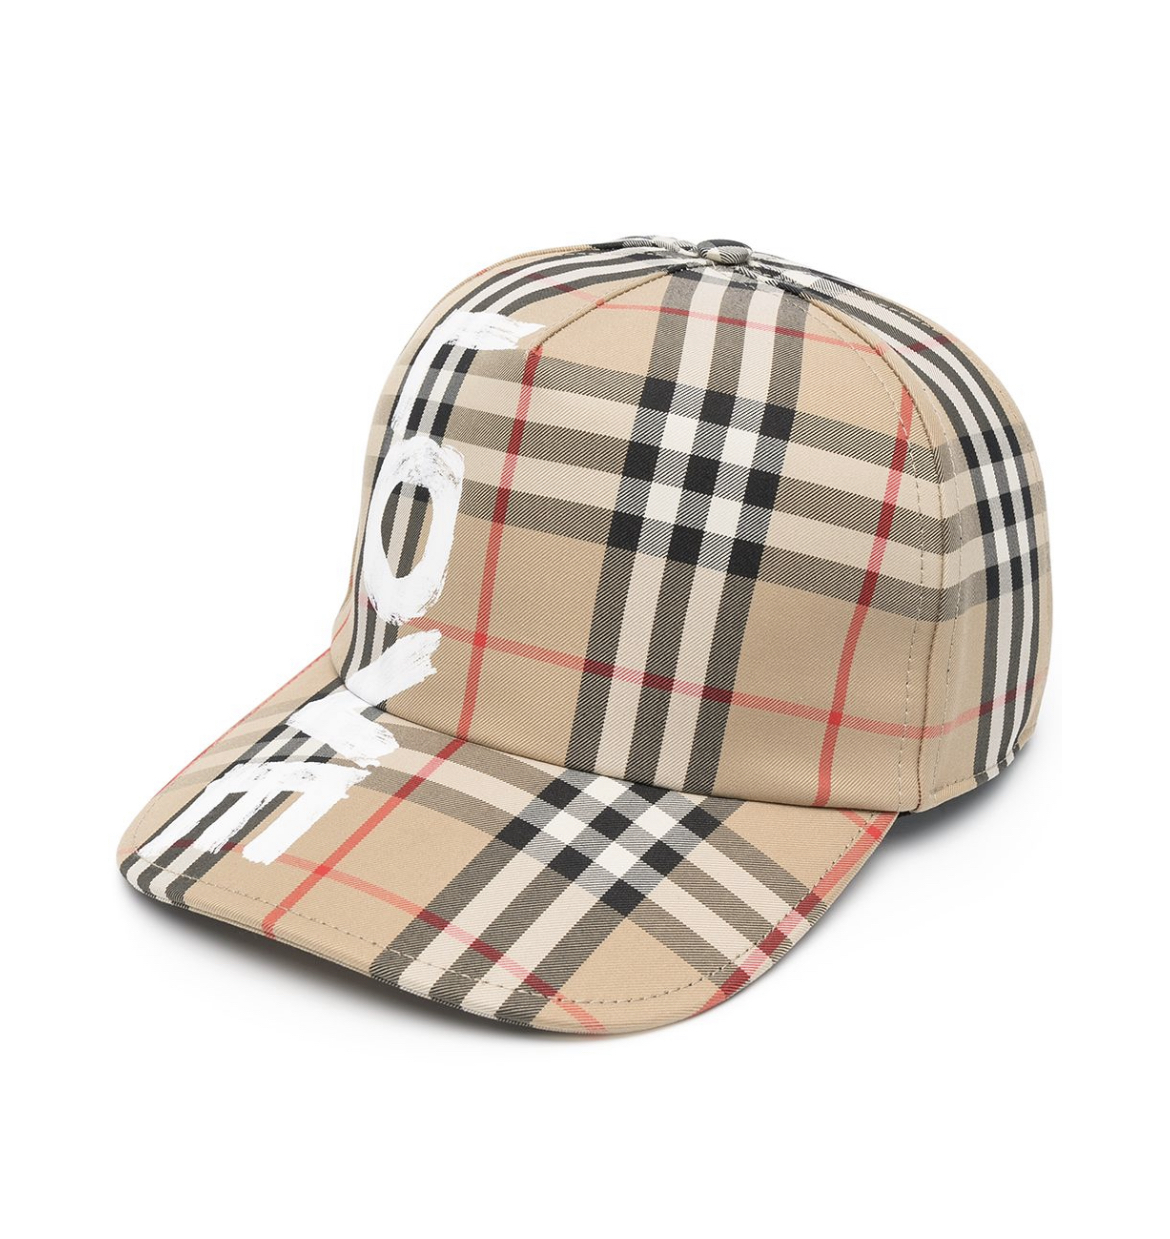 Burberry hat in cotton with Burberry Check print